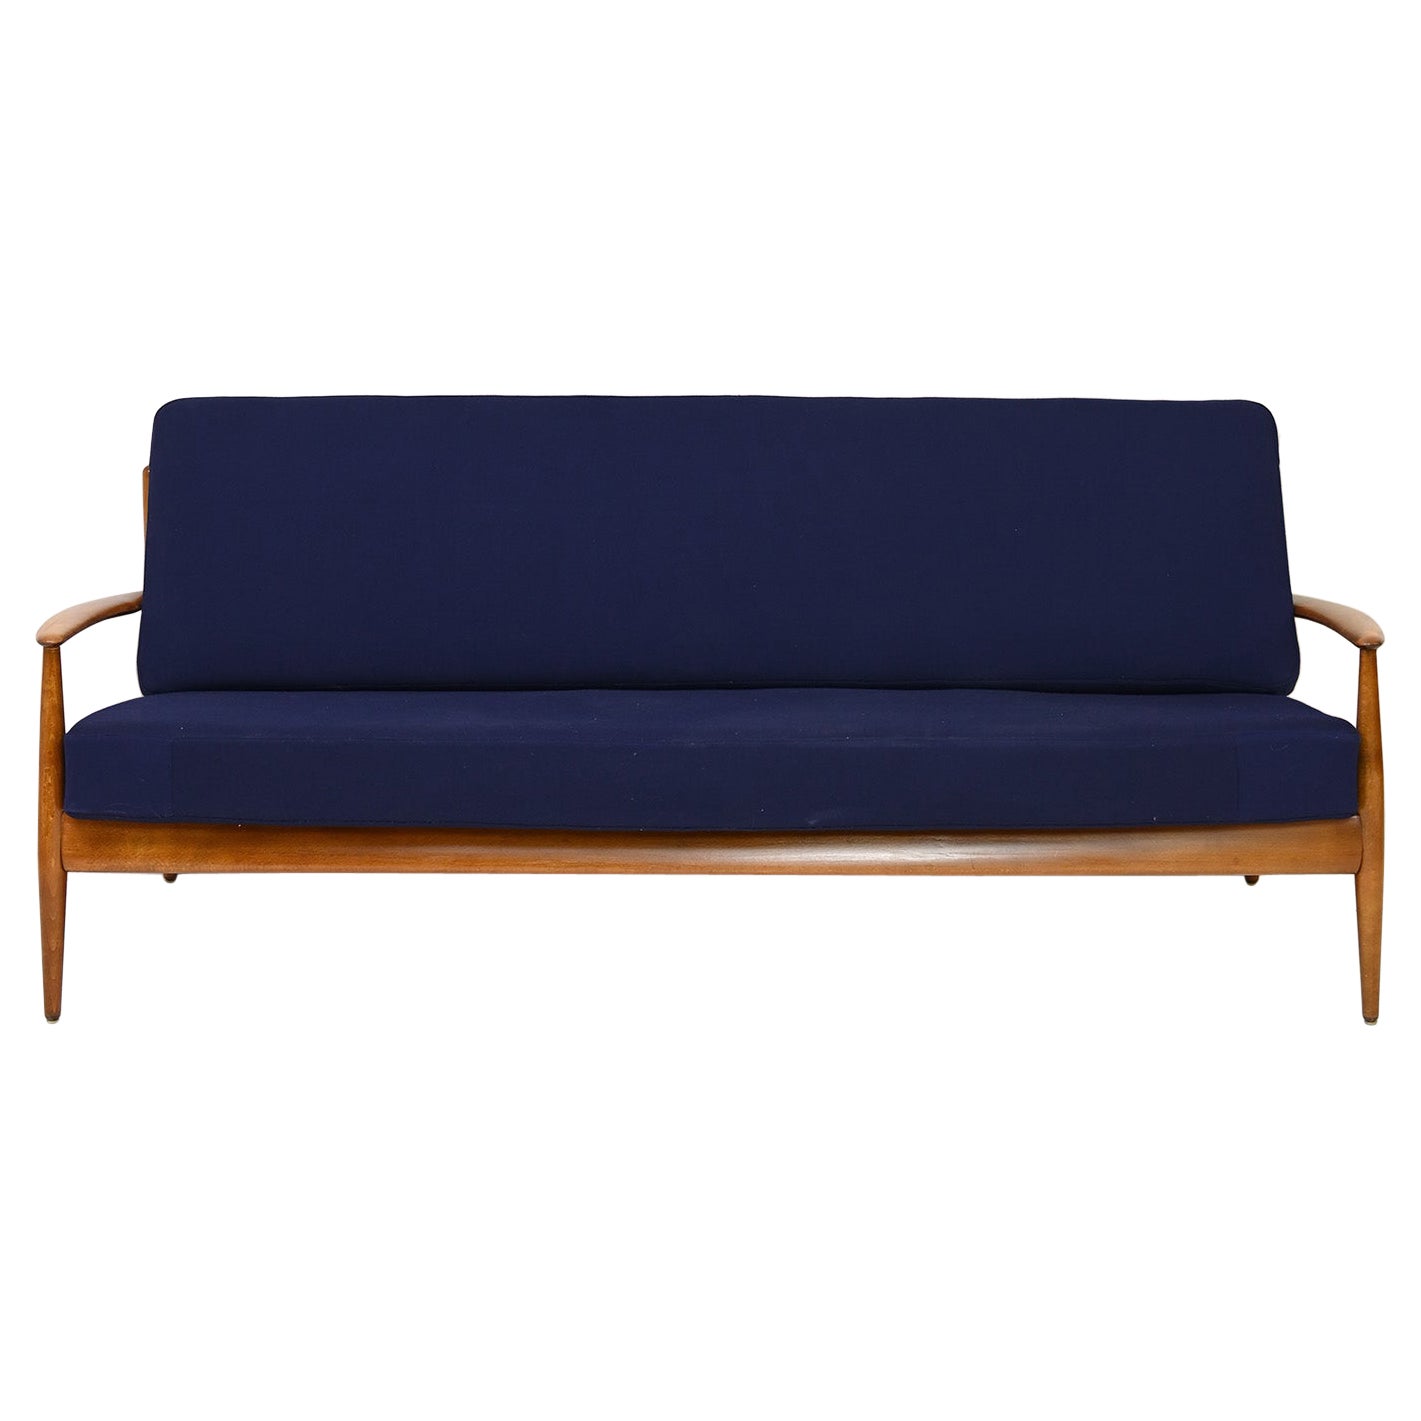 Three-seater sofa designed by Grete Jalk for France & Søn